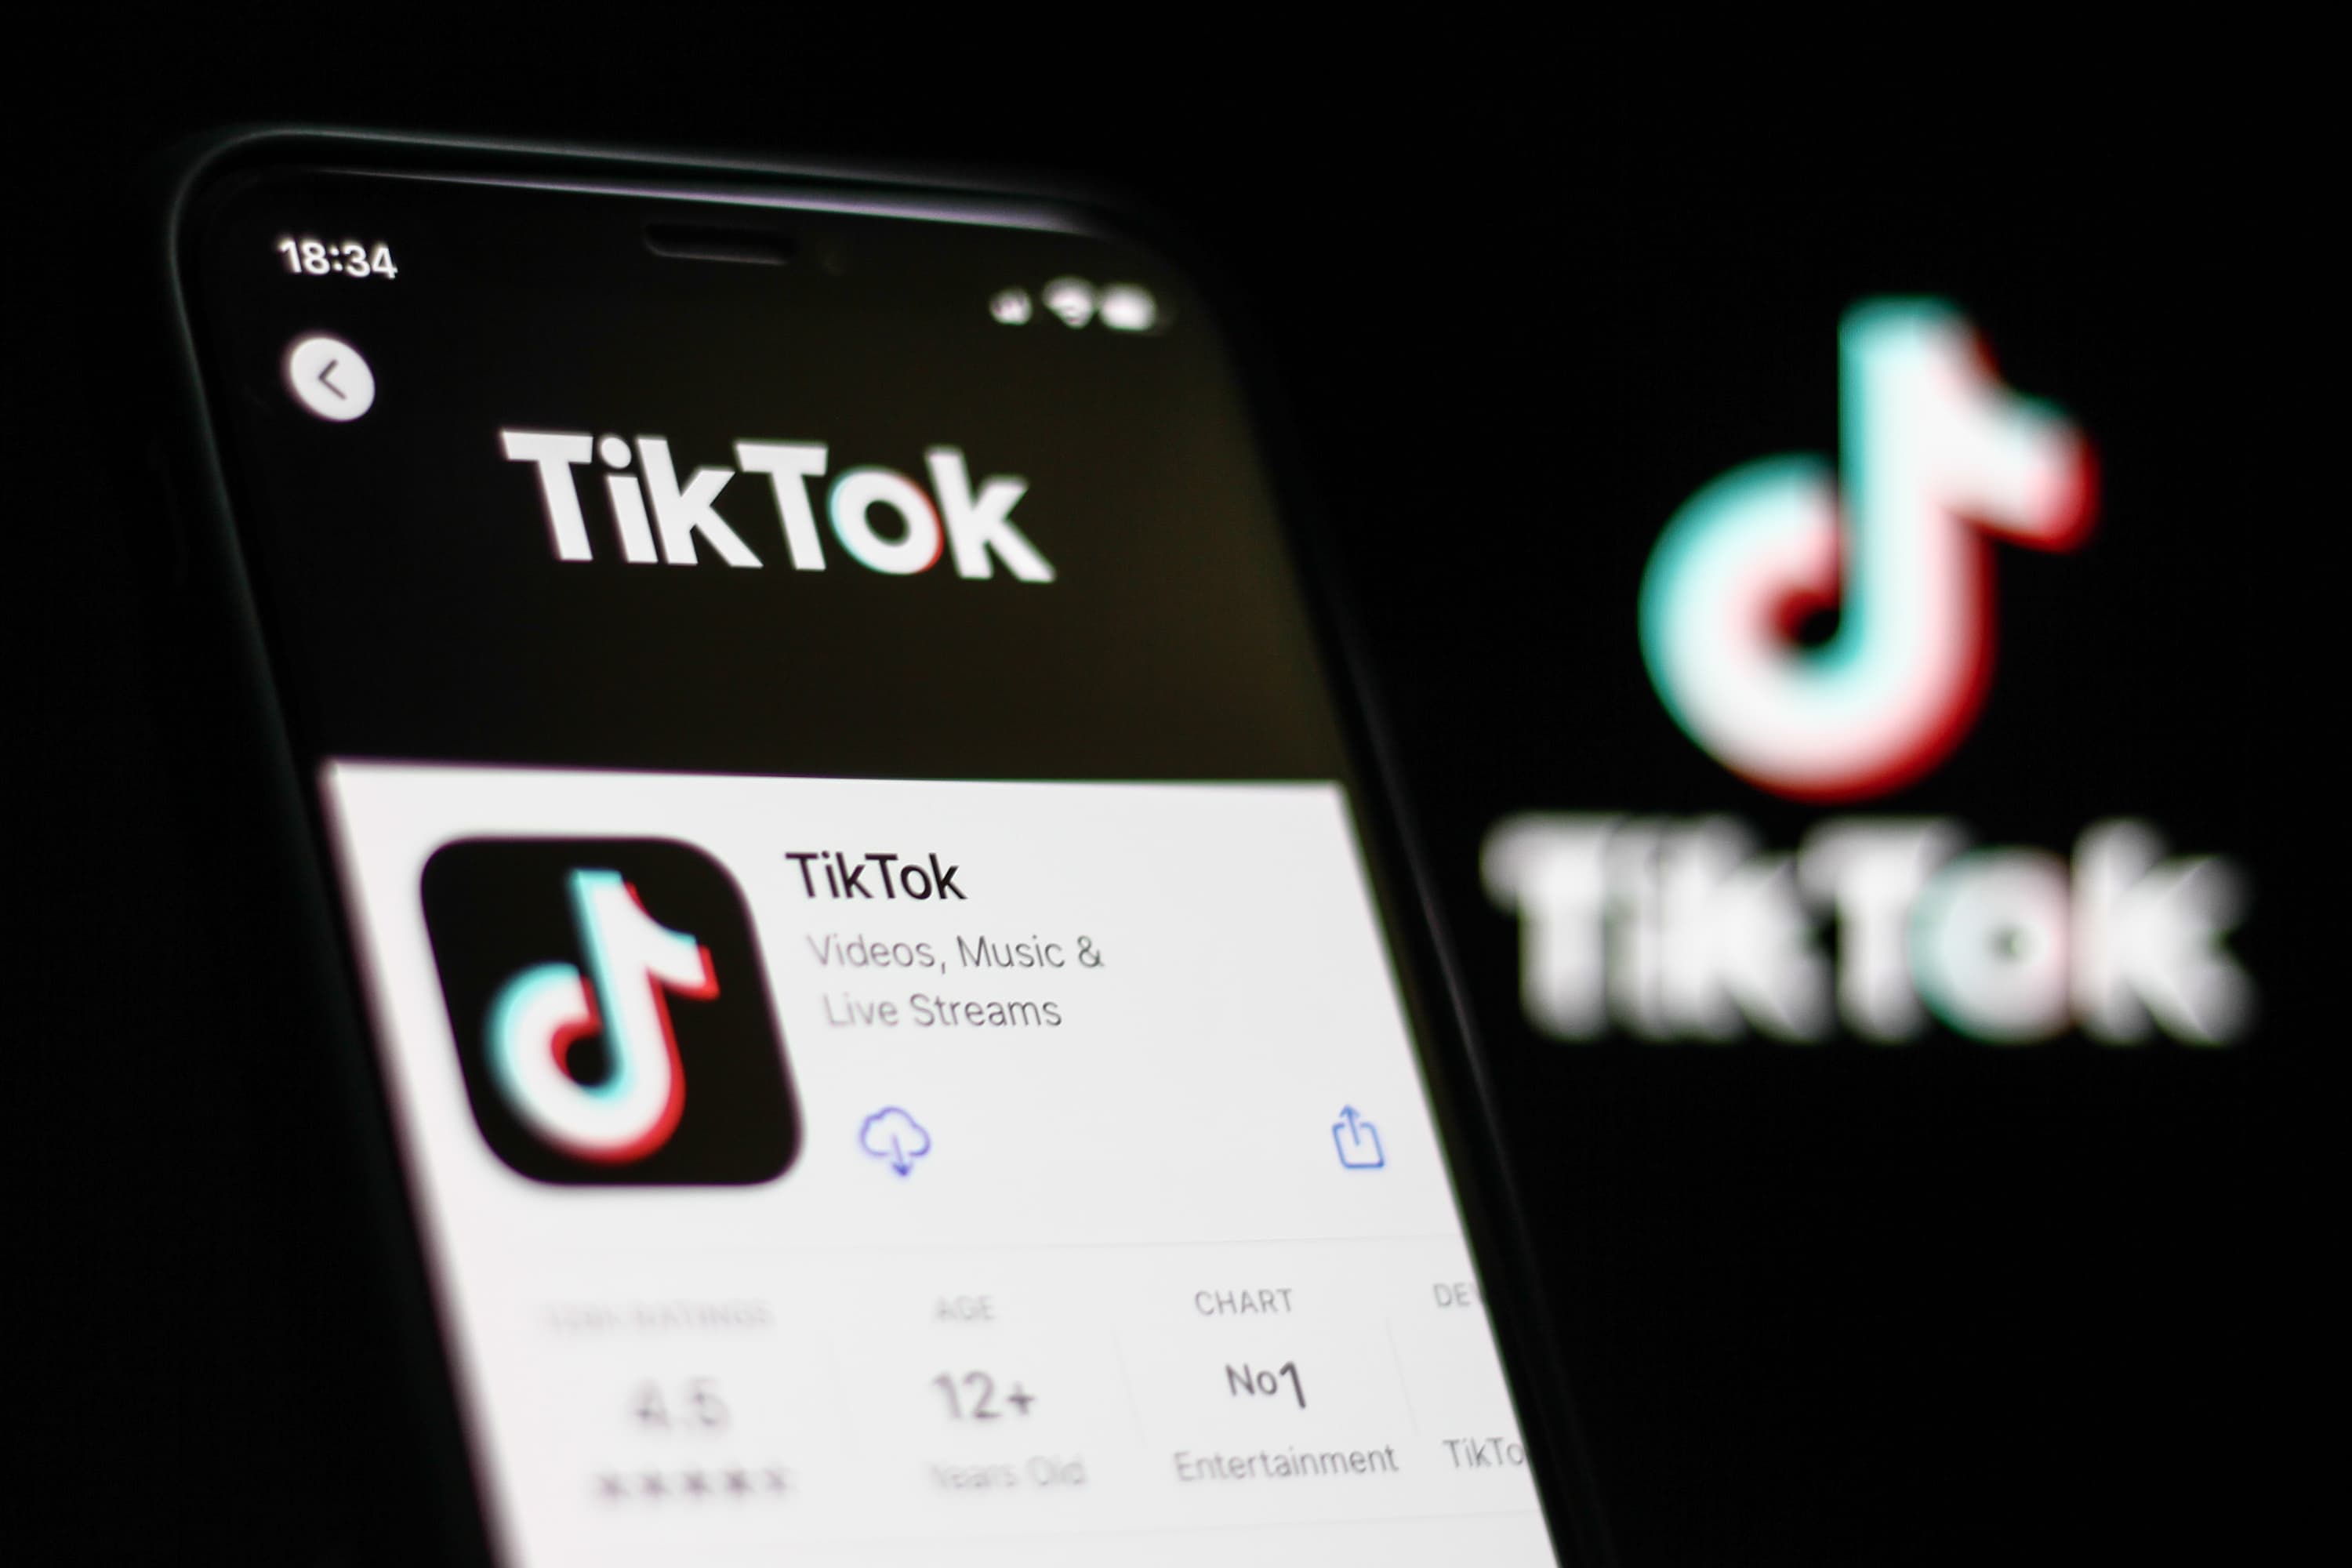 TikTok Surpasses Google as Most Popular Website of the Year, New Data
Suggests